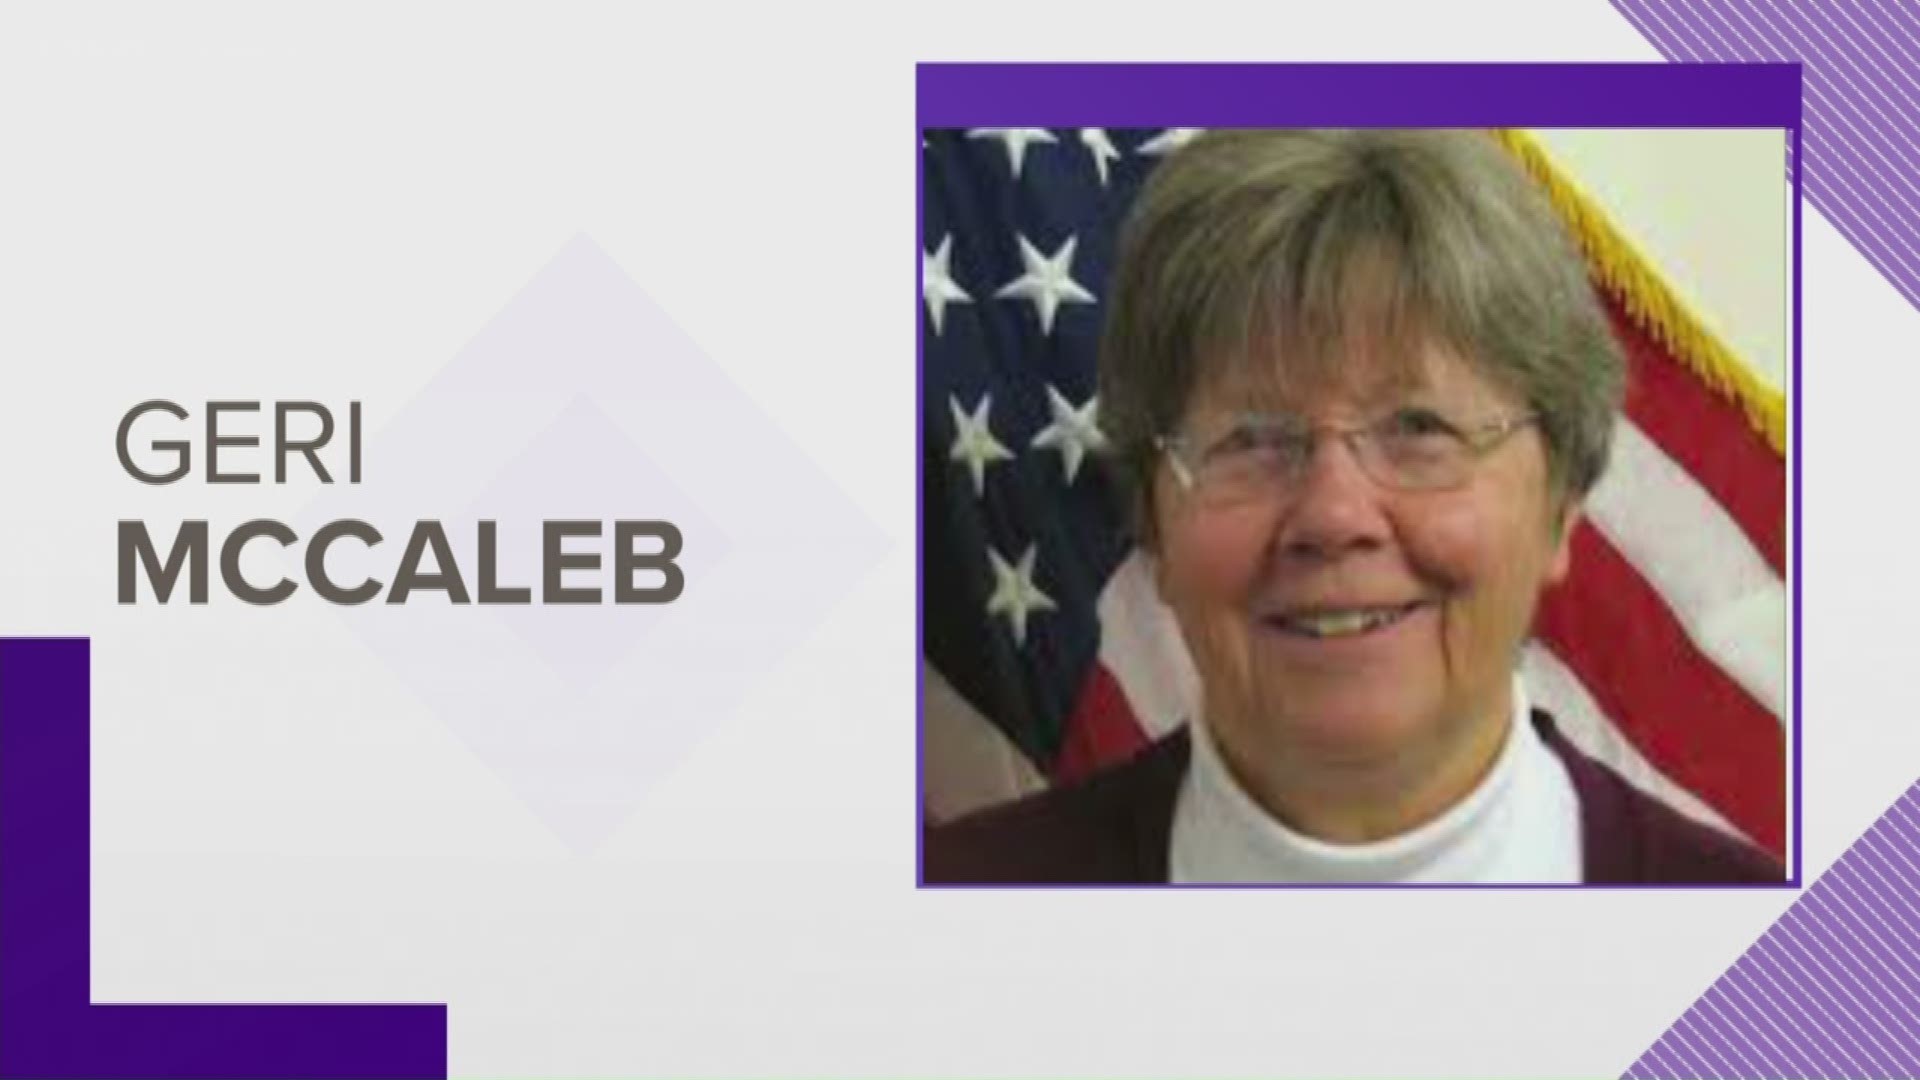 Four term incumbent Geri McCaleb lost to two challengers in Tuesday night's election.